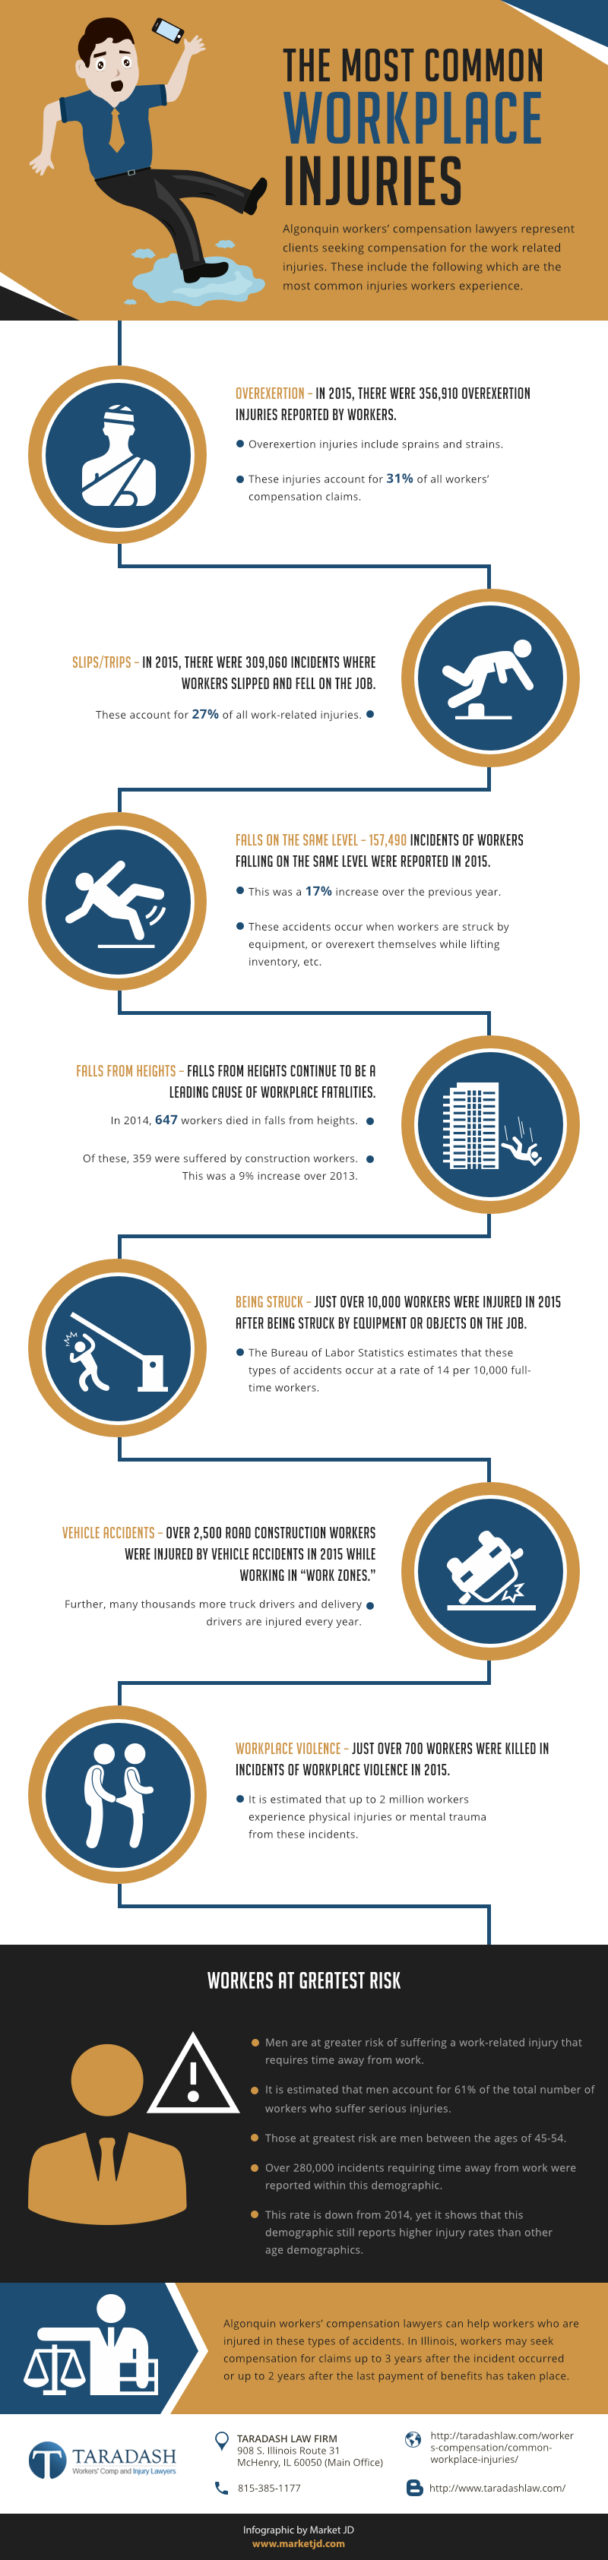 Infographic_Most Common Workplace Injuries